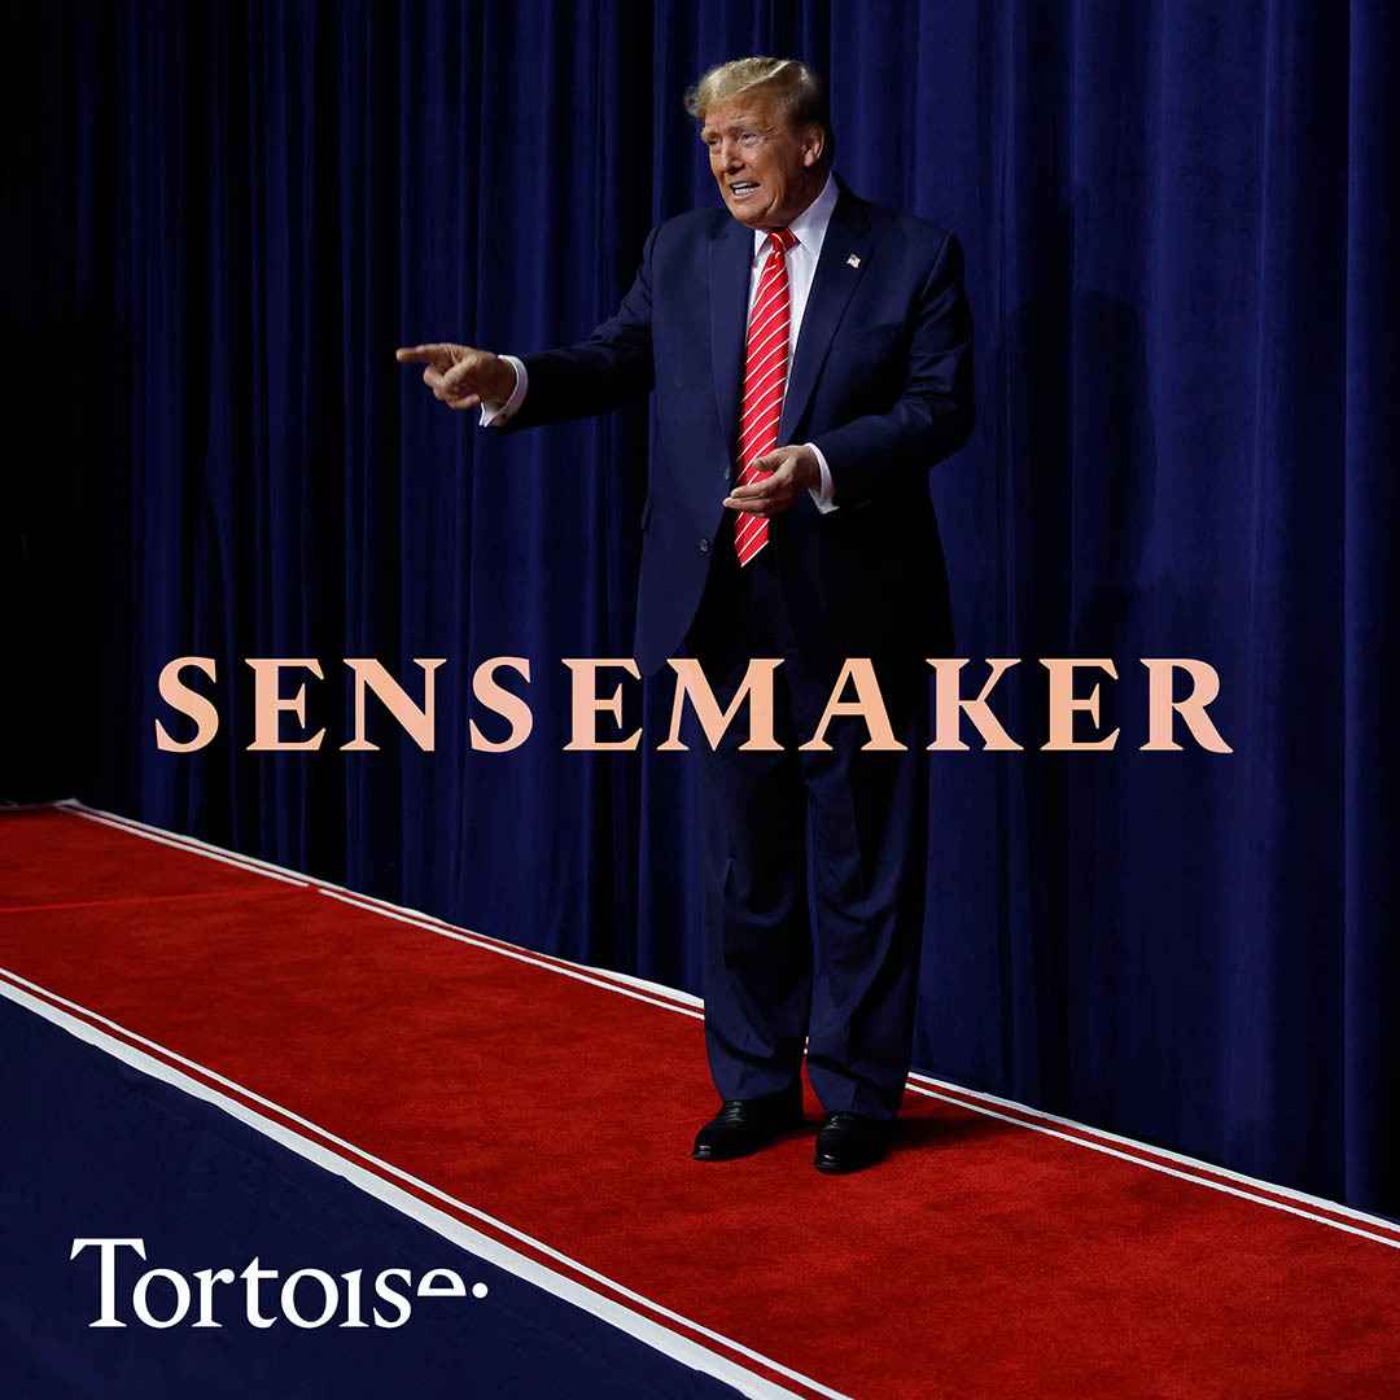 Sensemaker: The truth about Trump’s Truth Social